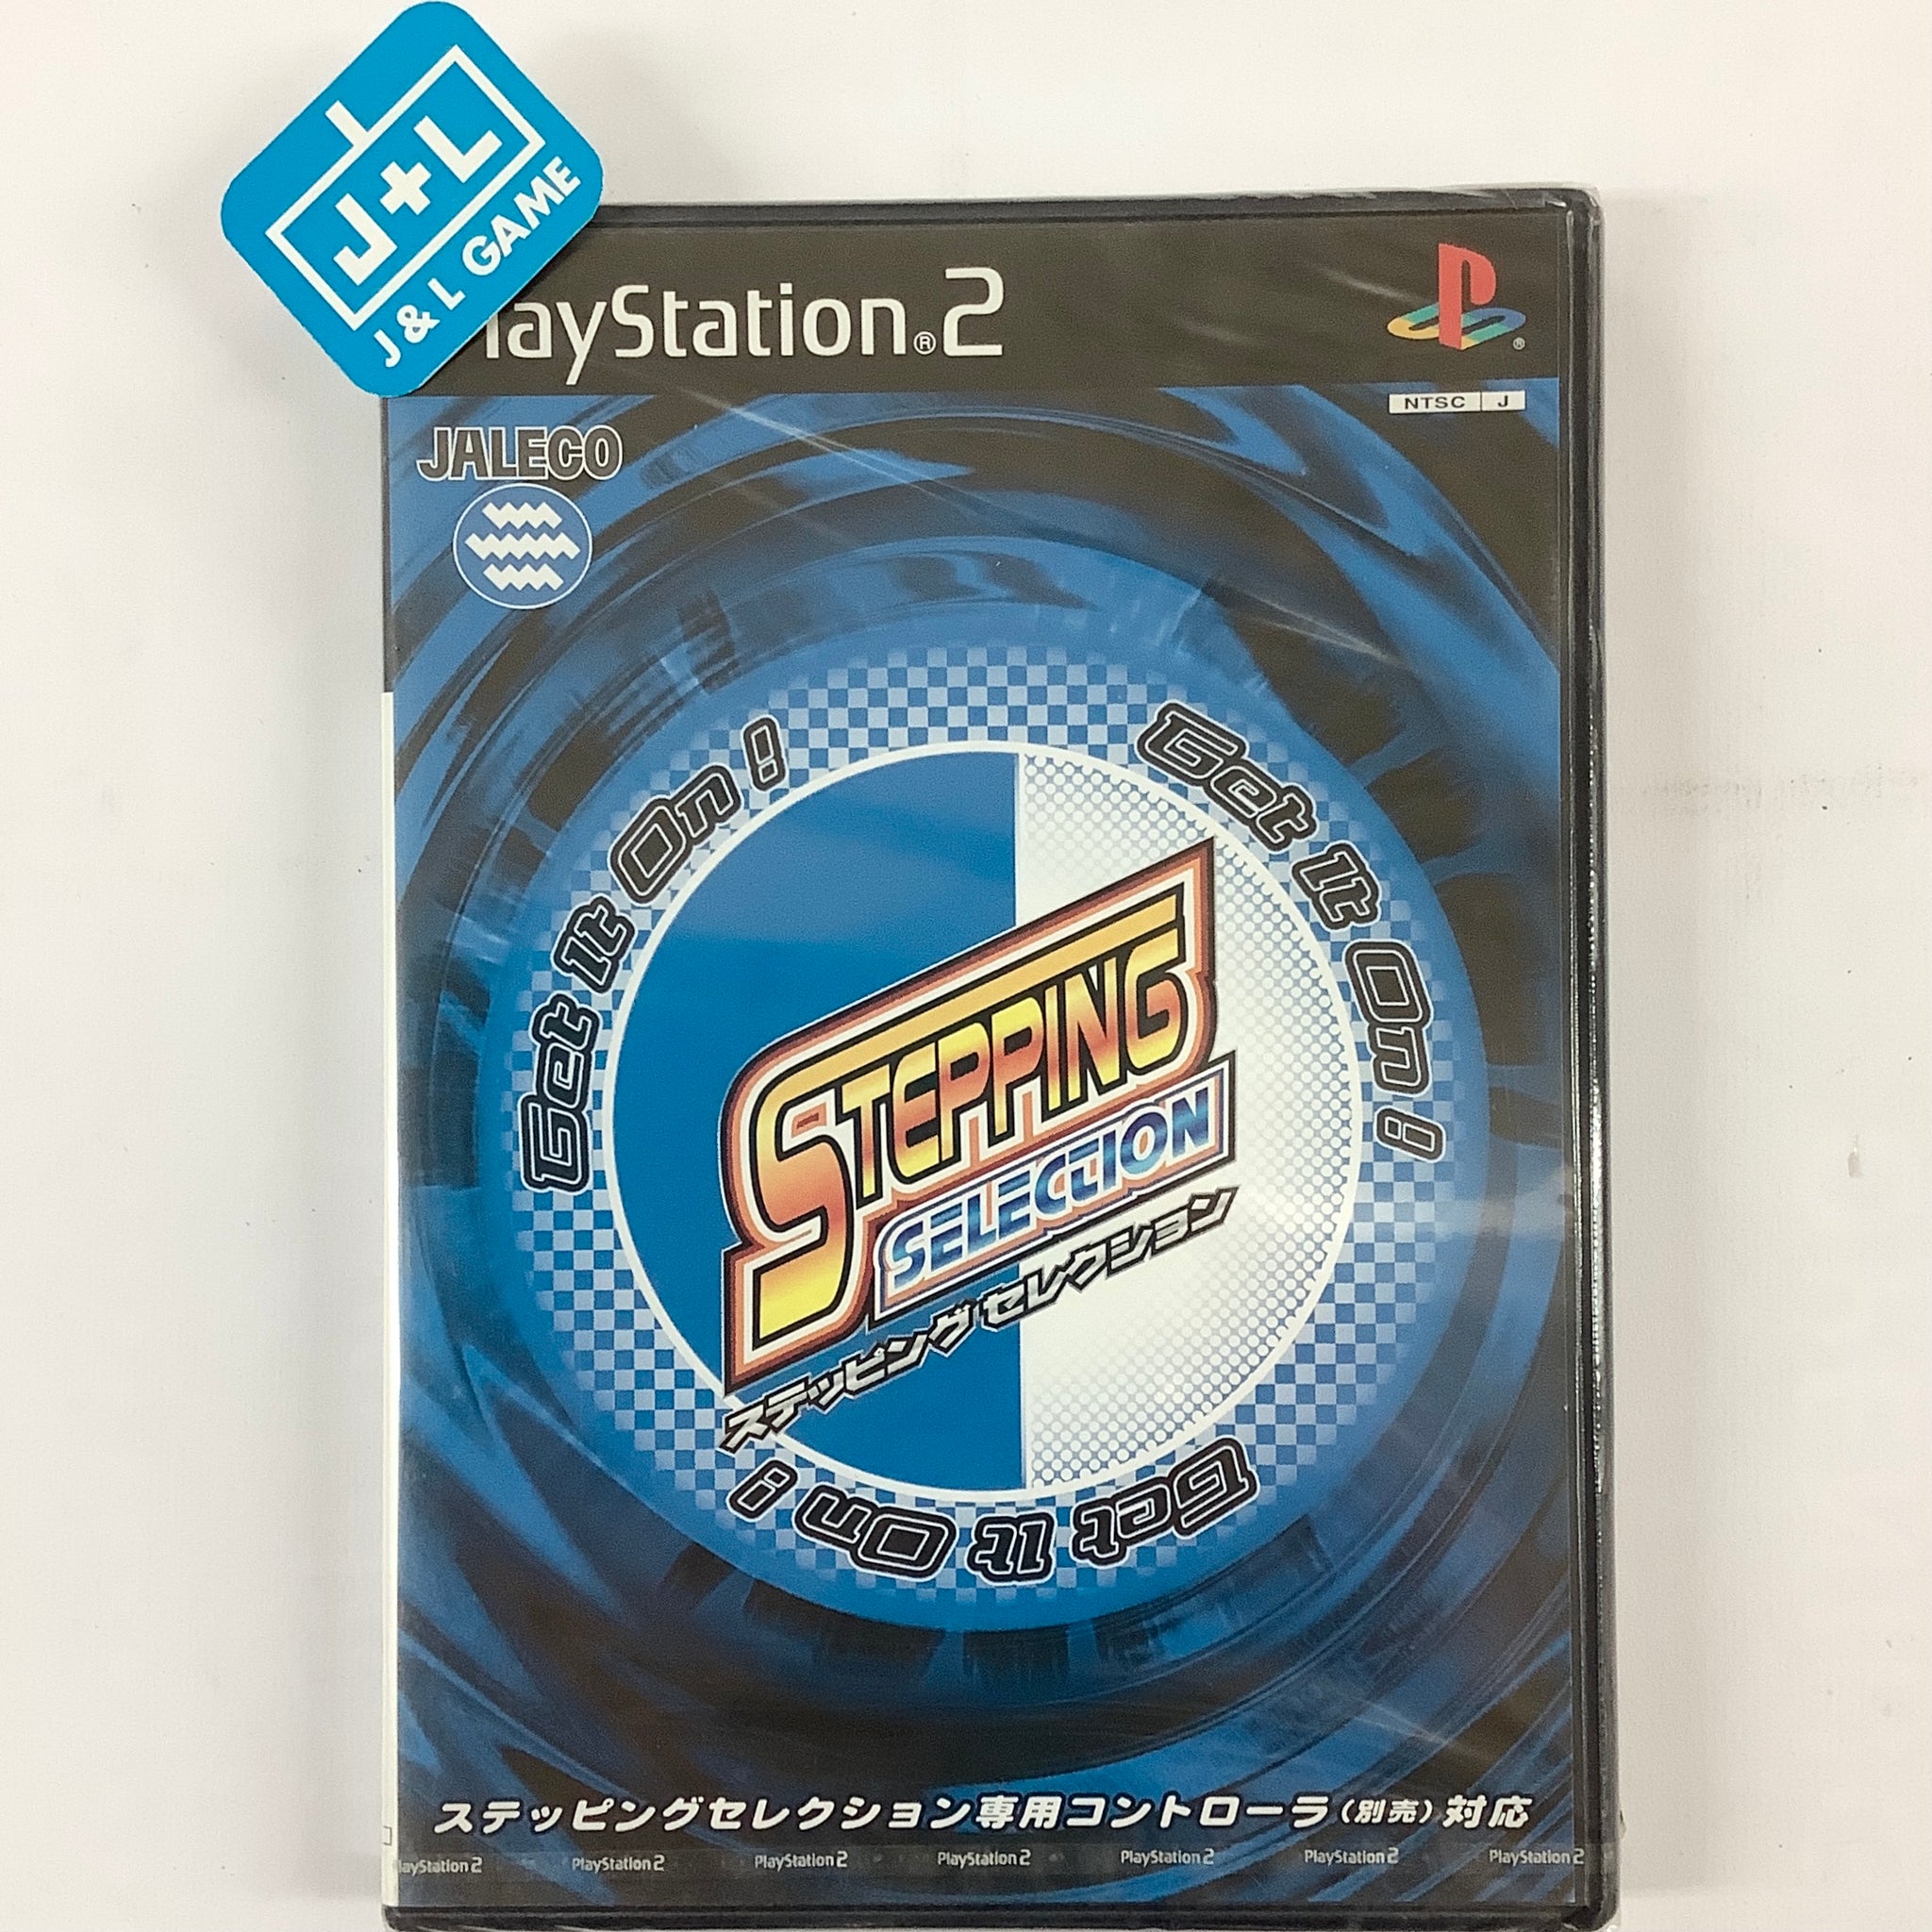 Stepping Selection - (PS2) PlayStation 2 (Japanese Import) Video Games Jaleco Entertainment   